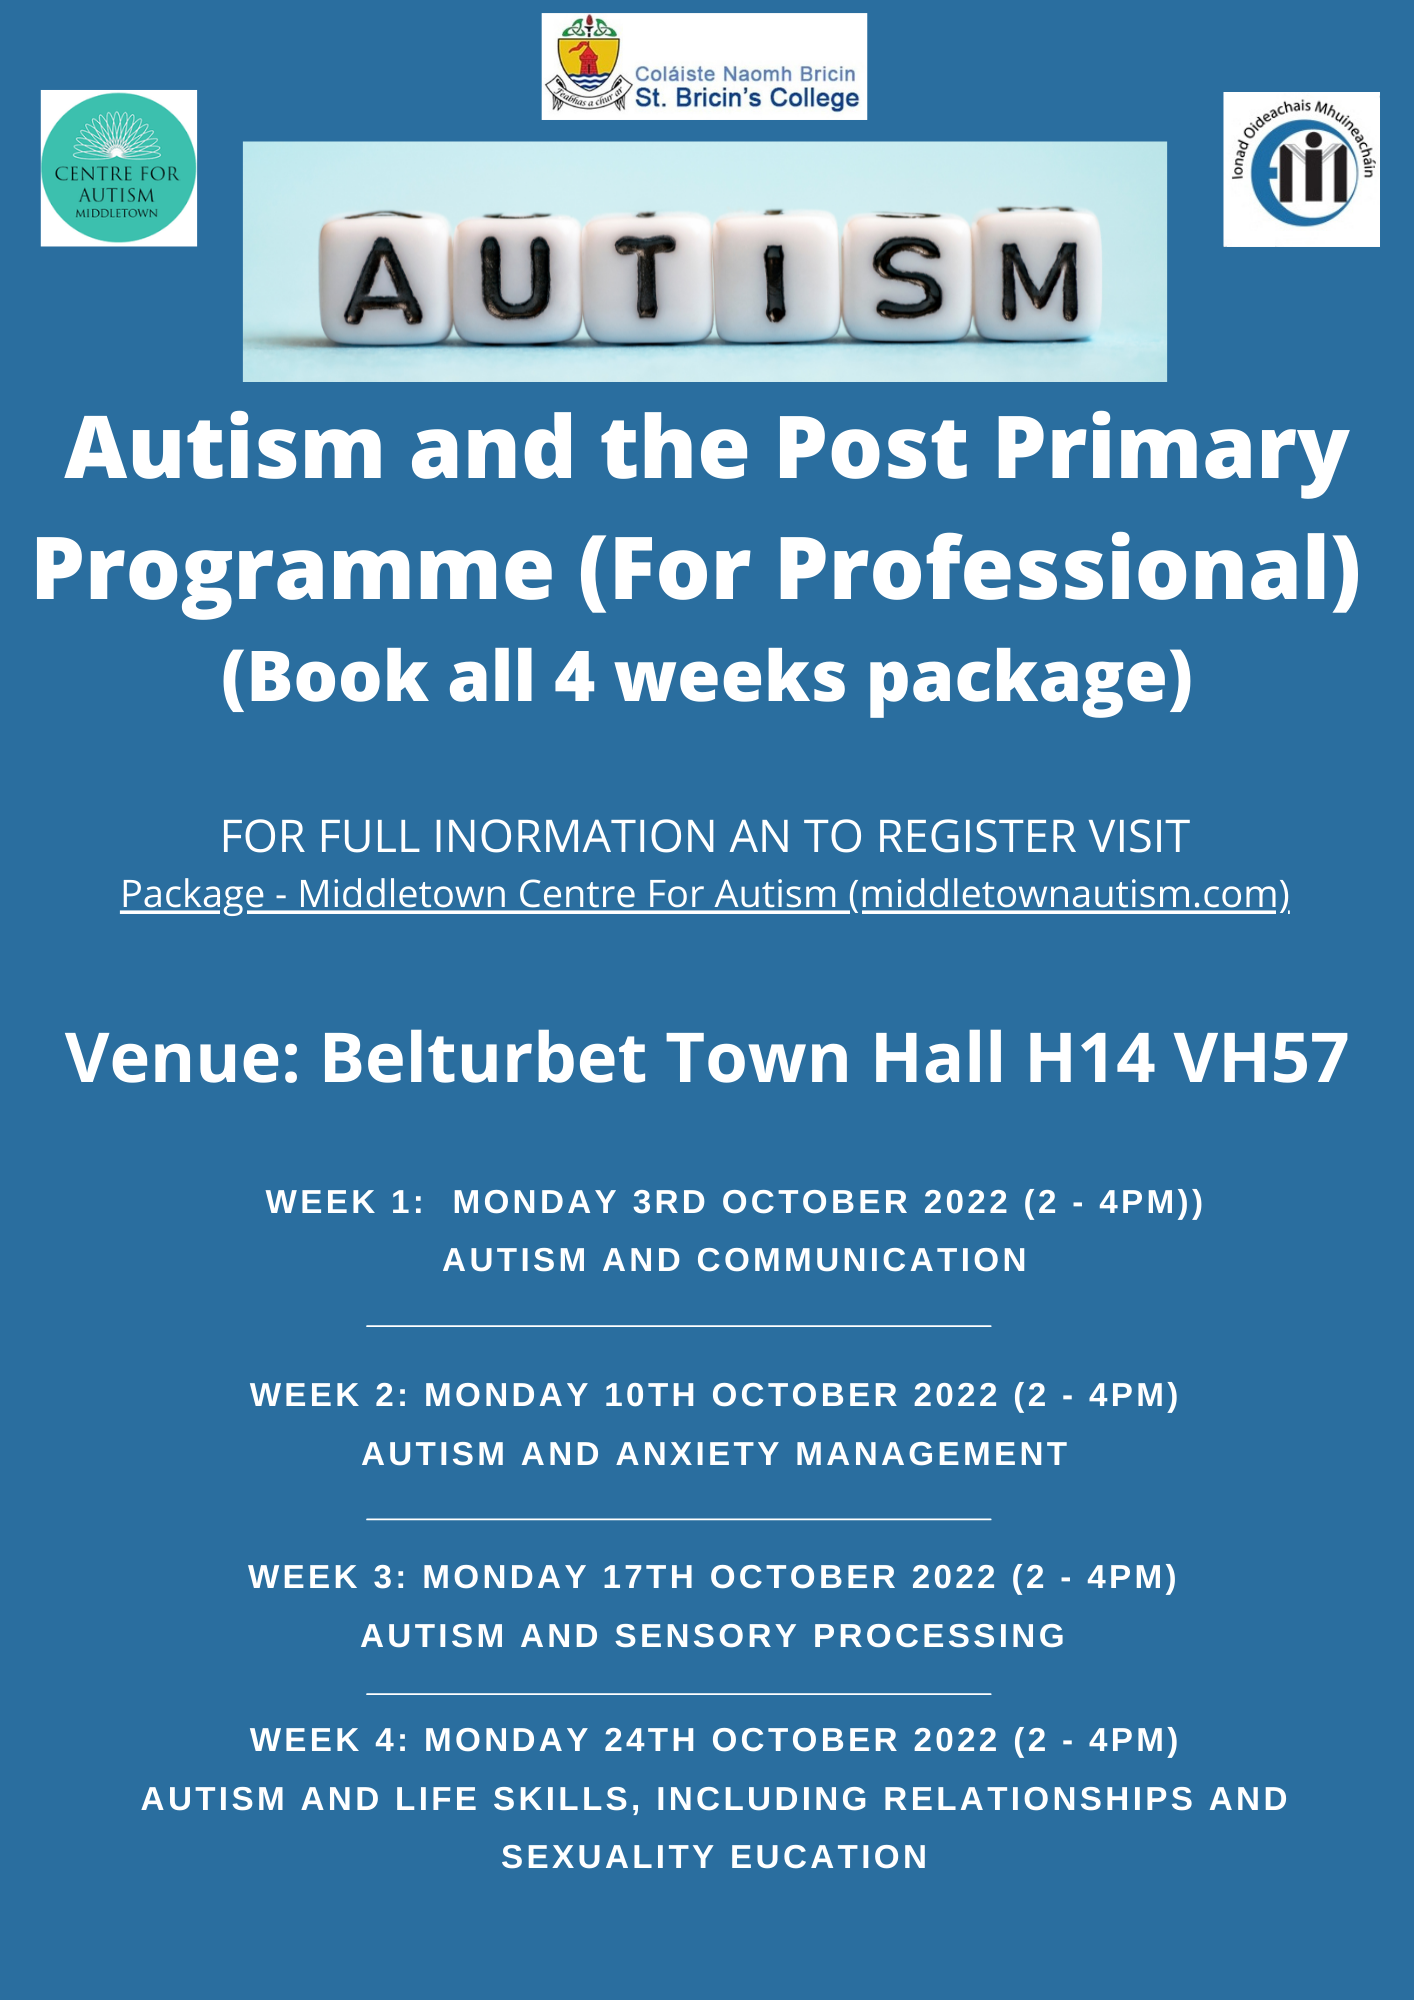 Autism and the Post Primary Programme For Professional